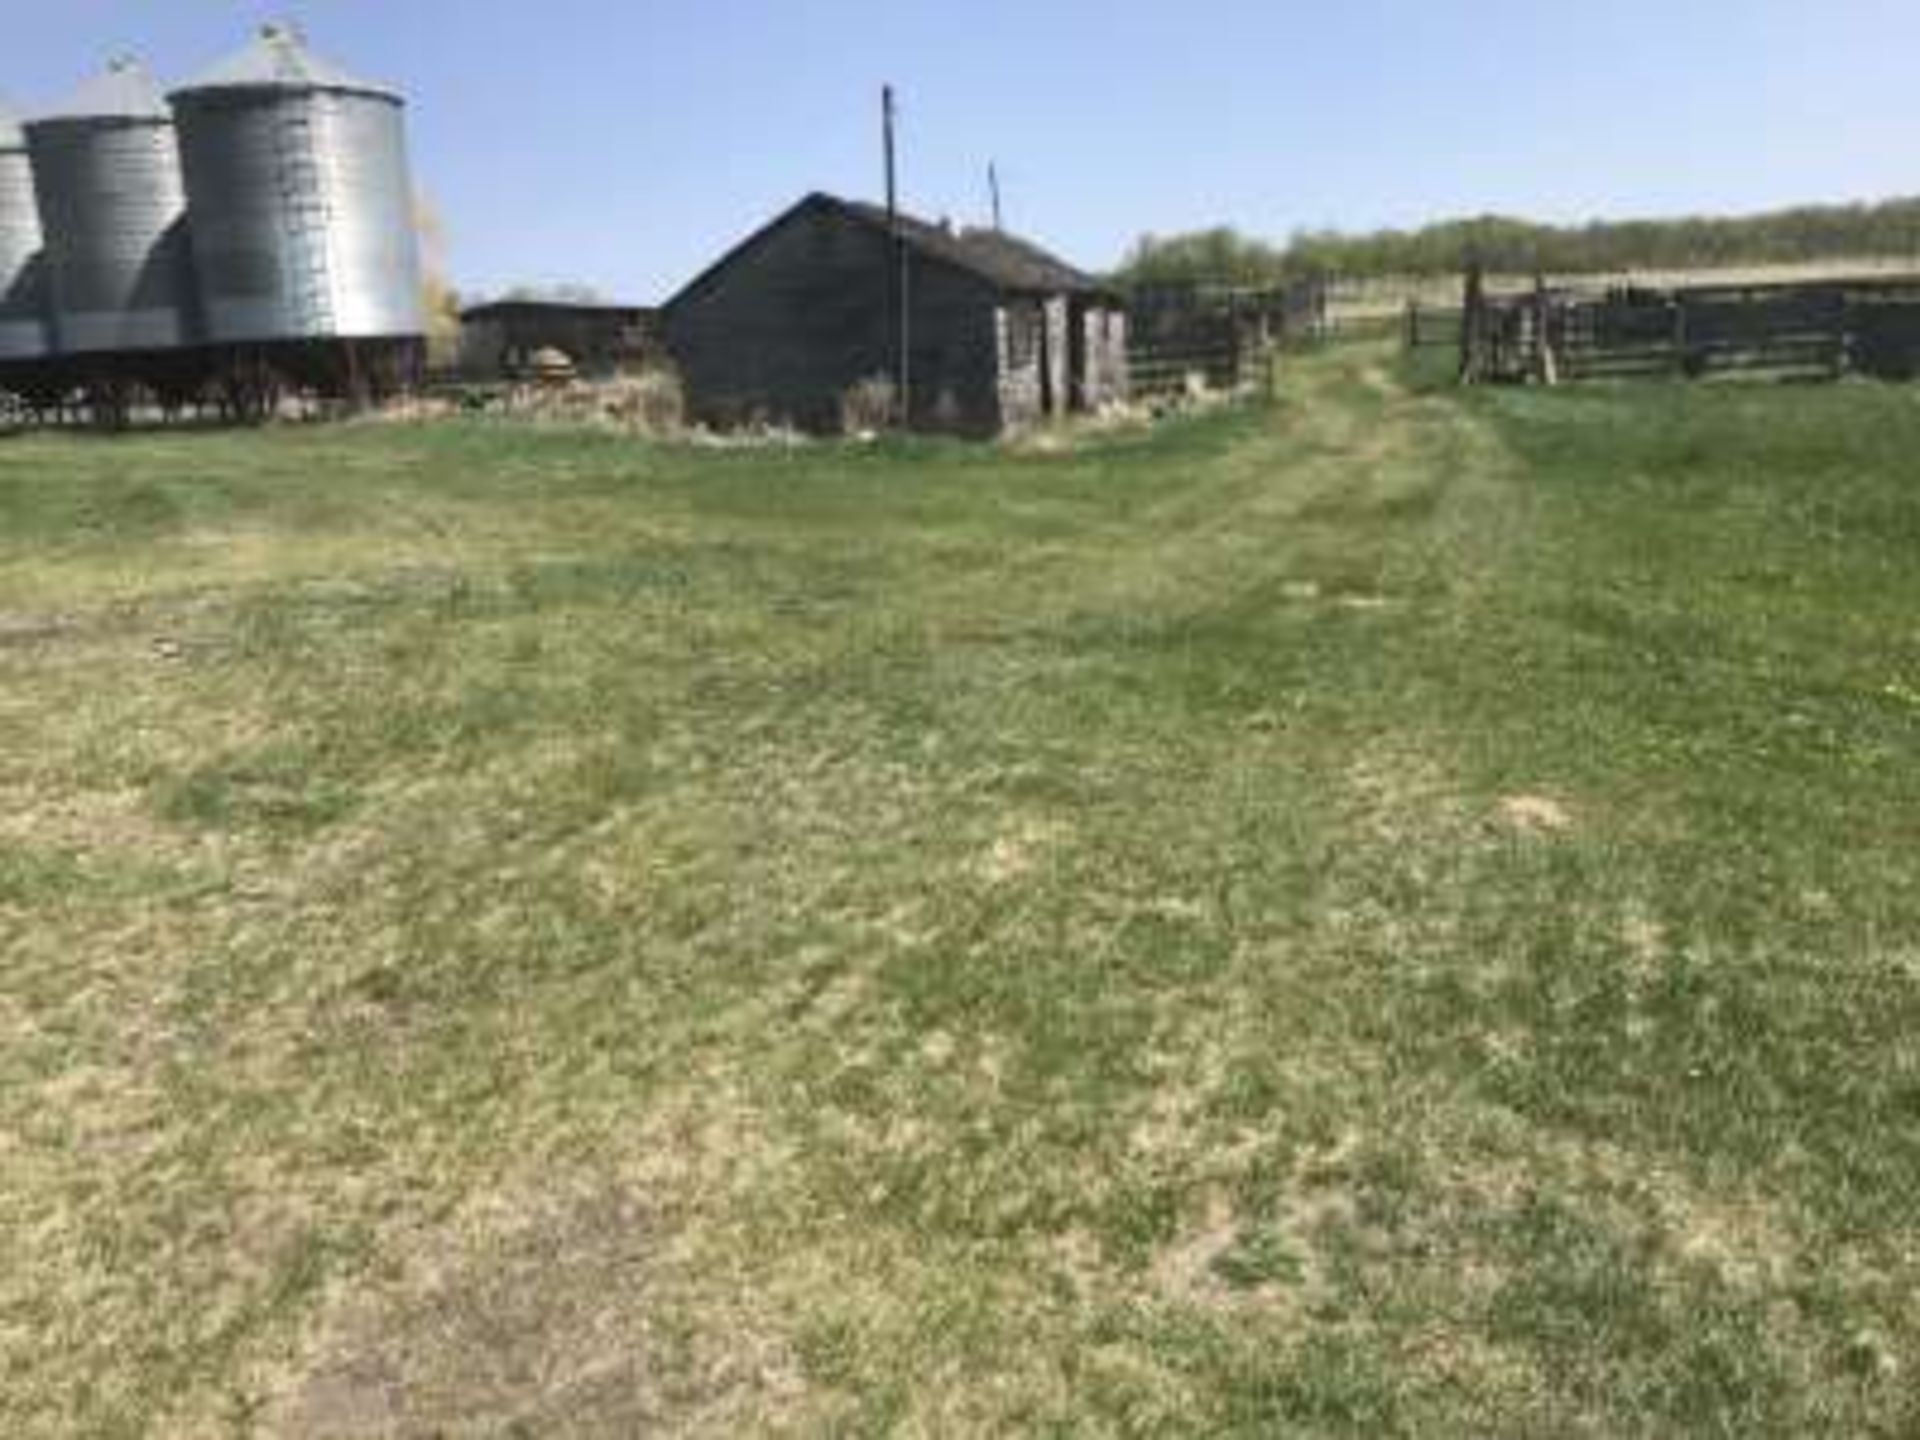 Agriculture and Pasture Land : 1/2 section of land including buildings 3 wired fence as follows: - Bild 5 aus 33